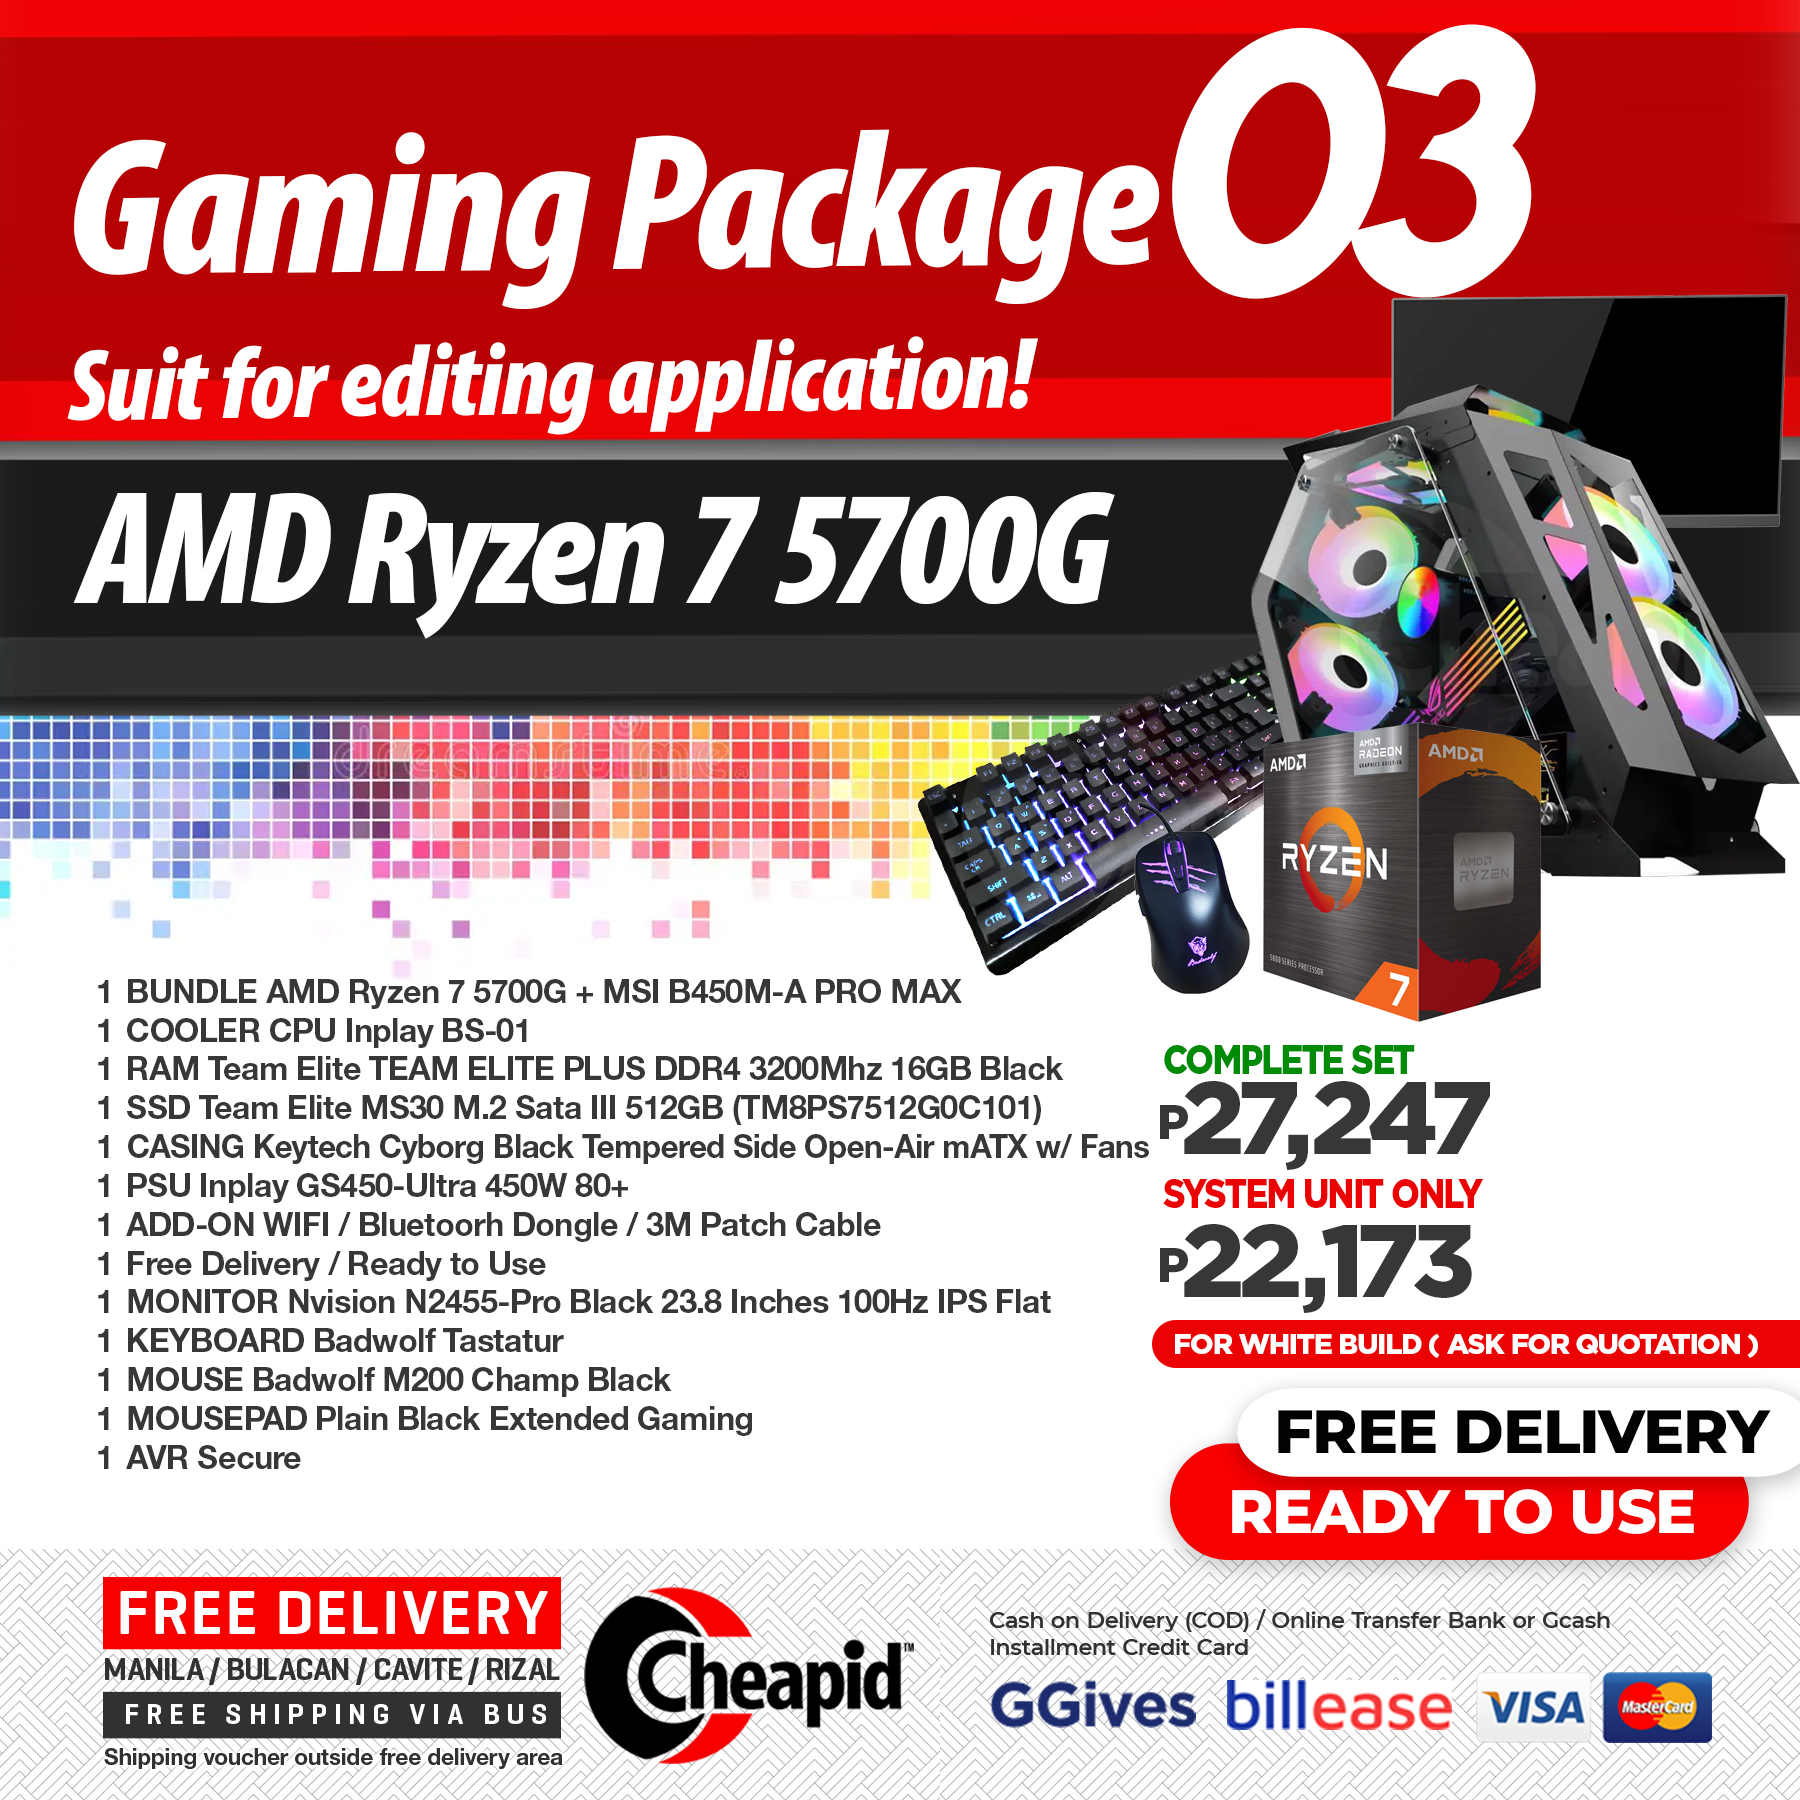 Cheapid Gaming Package - Setup 03